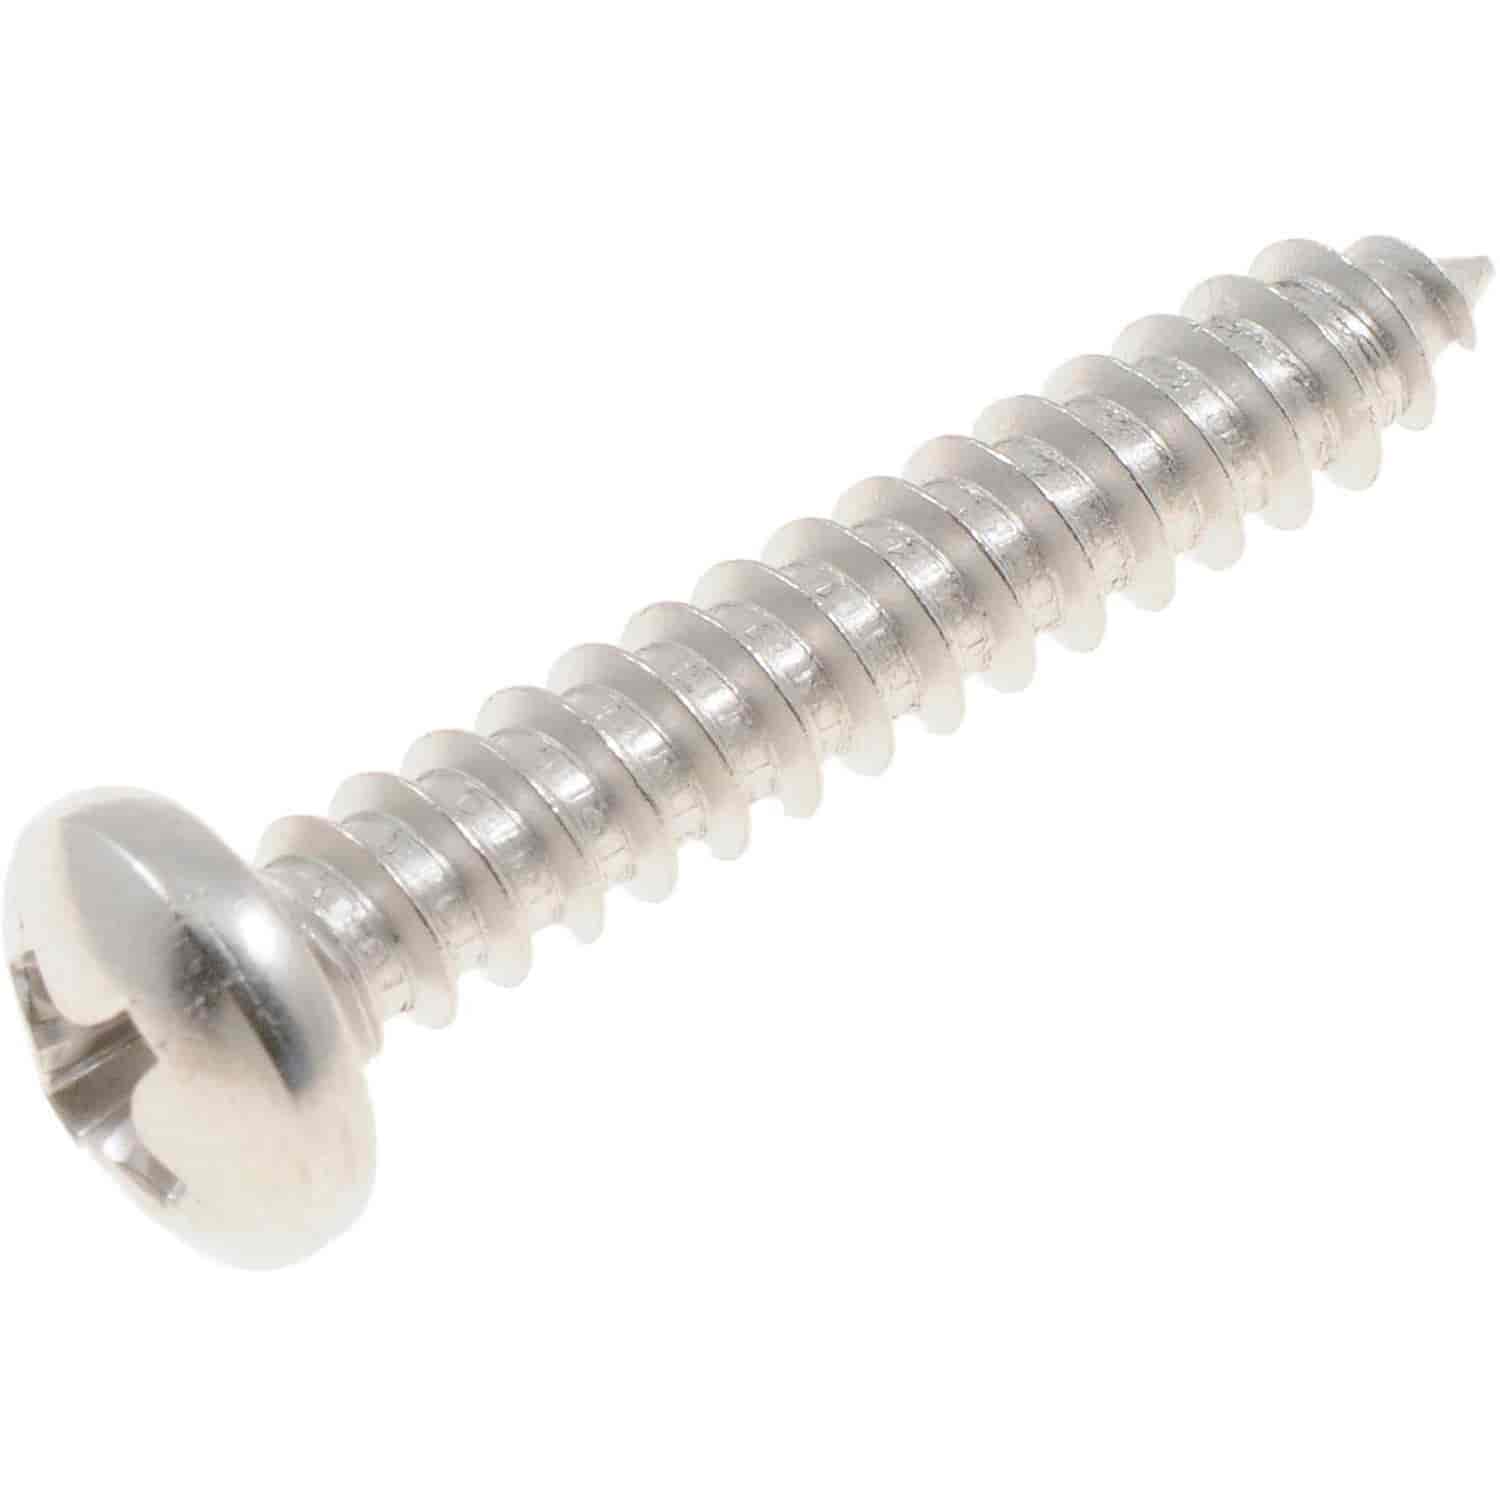 Self Tapping Screw-Stainless Steel-Pan Phillips Head-No. 8 x 1 In.